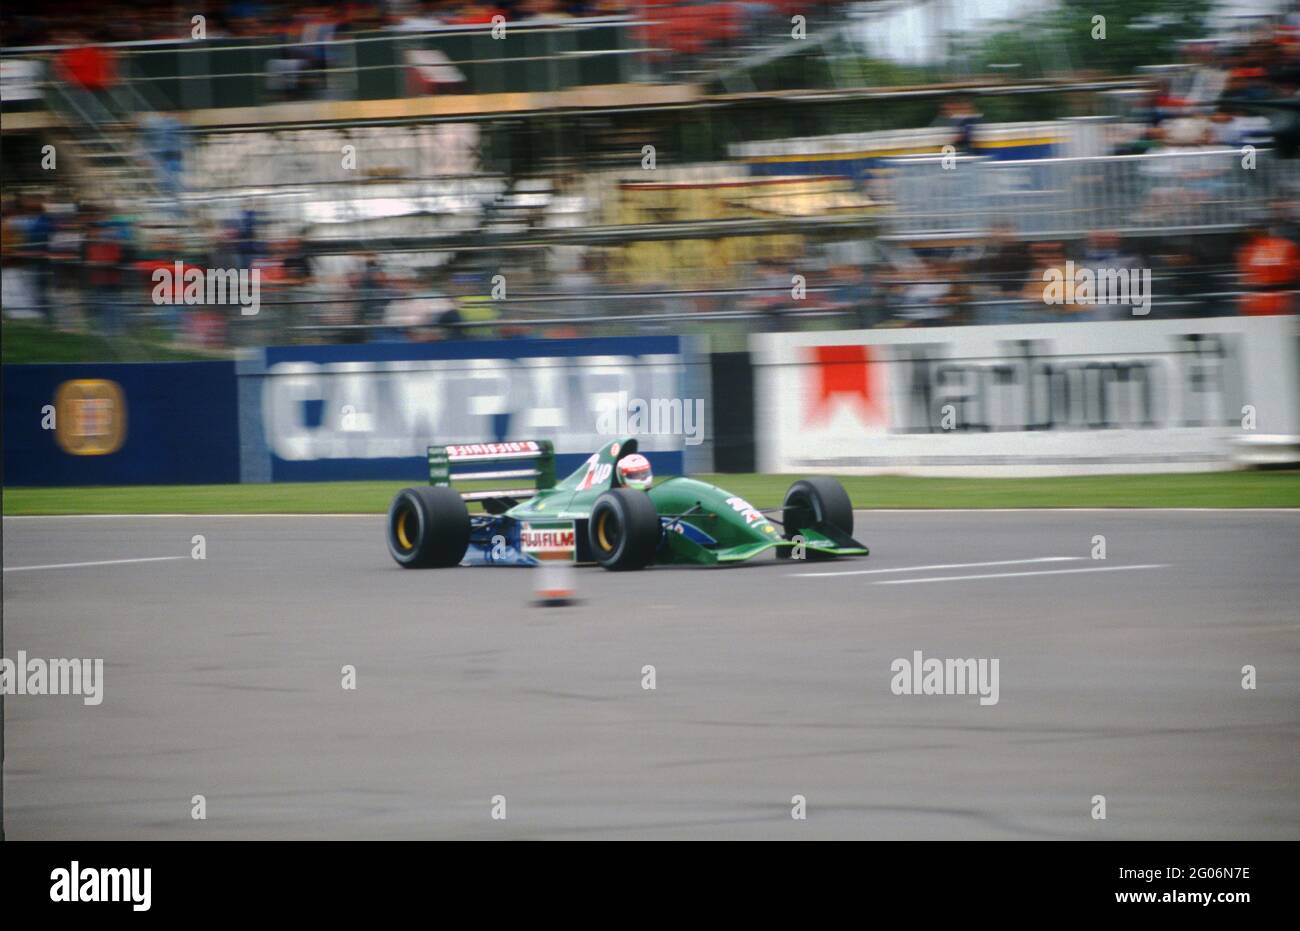 Nelson Piquet at speed in the Benetton B191 during practice for the 1991  British Grand Prix at Silverstone Stock Photo - Alamy